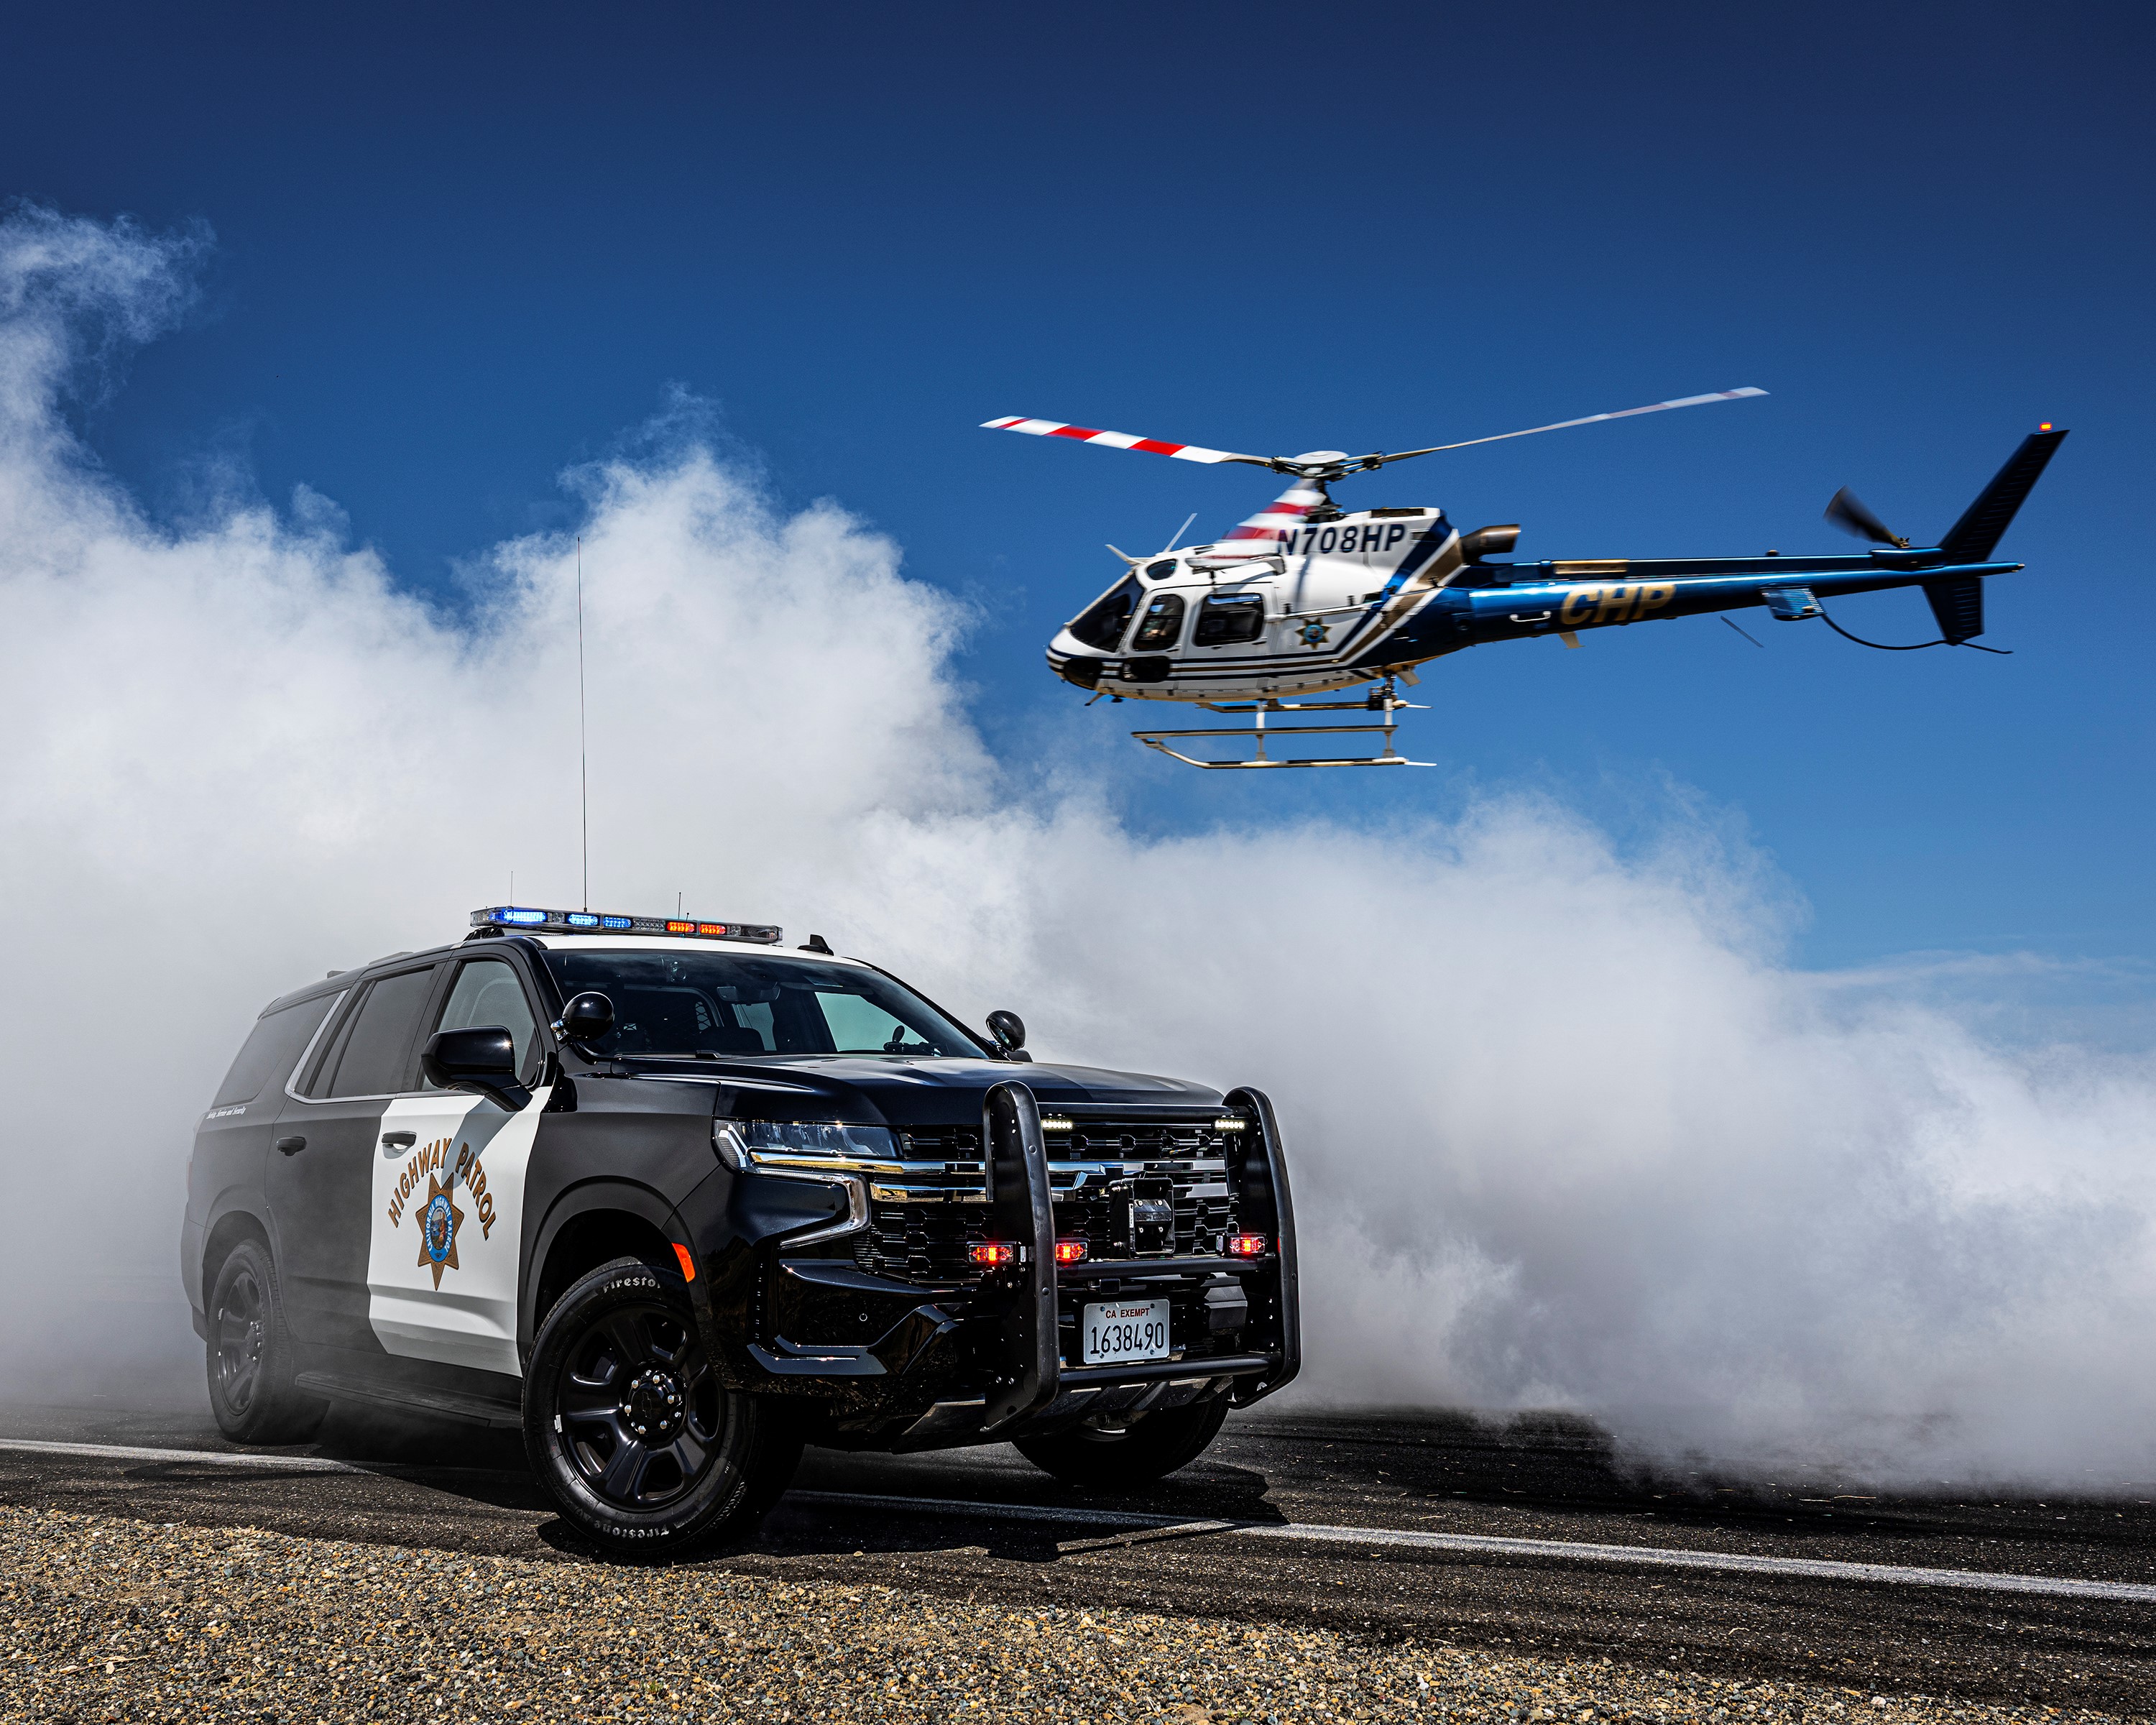 CHP Tahoe & Helicopter